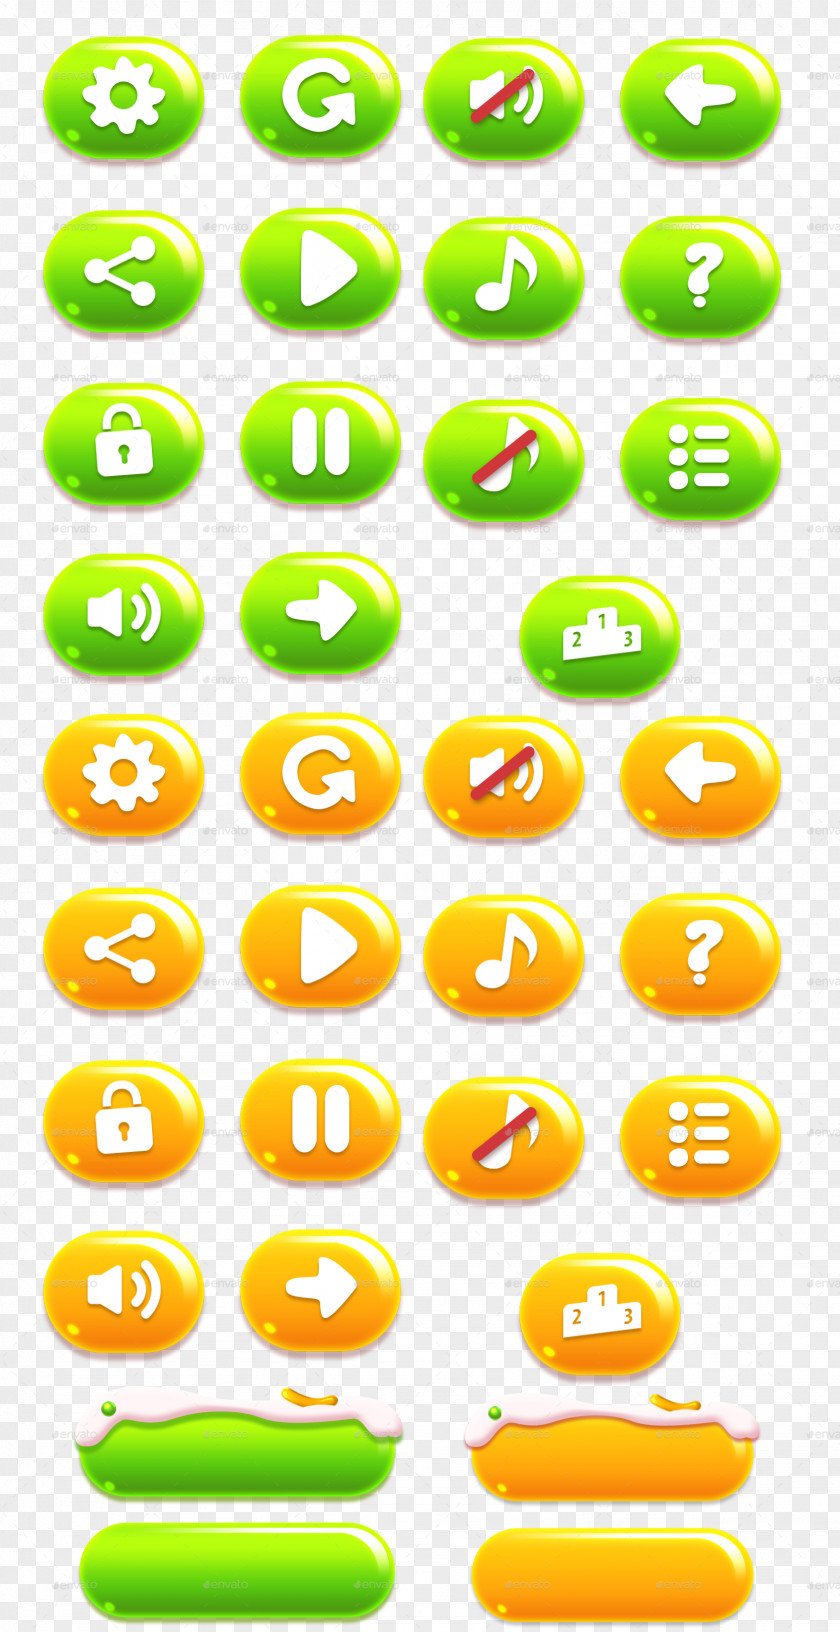 Button Graphical User Interface PNG